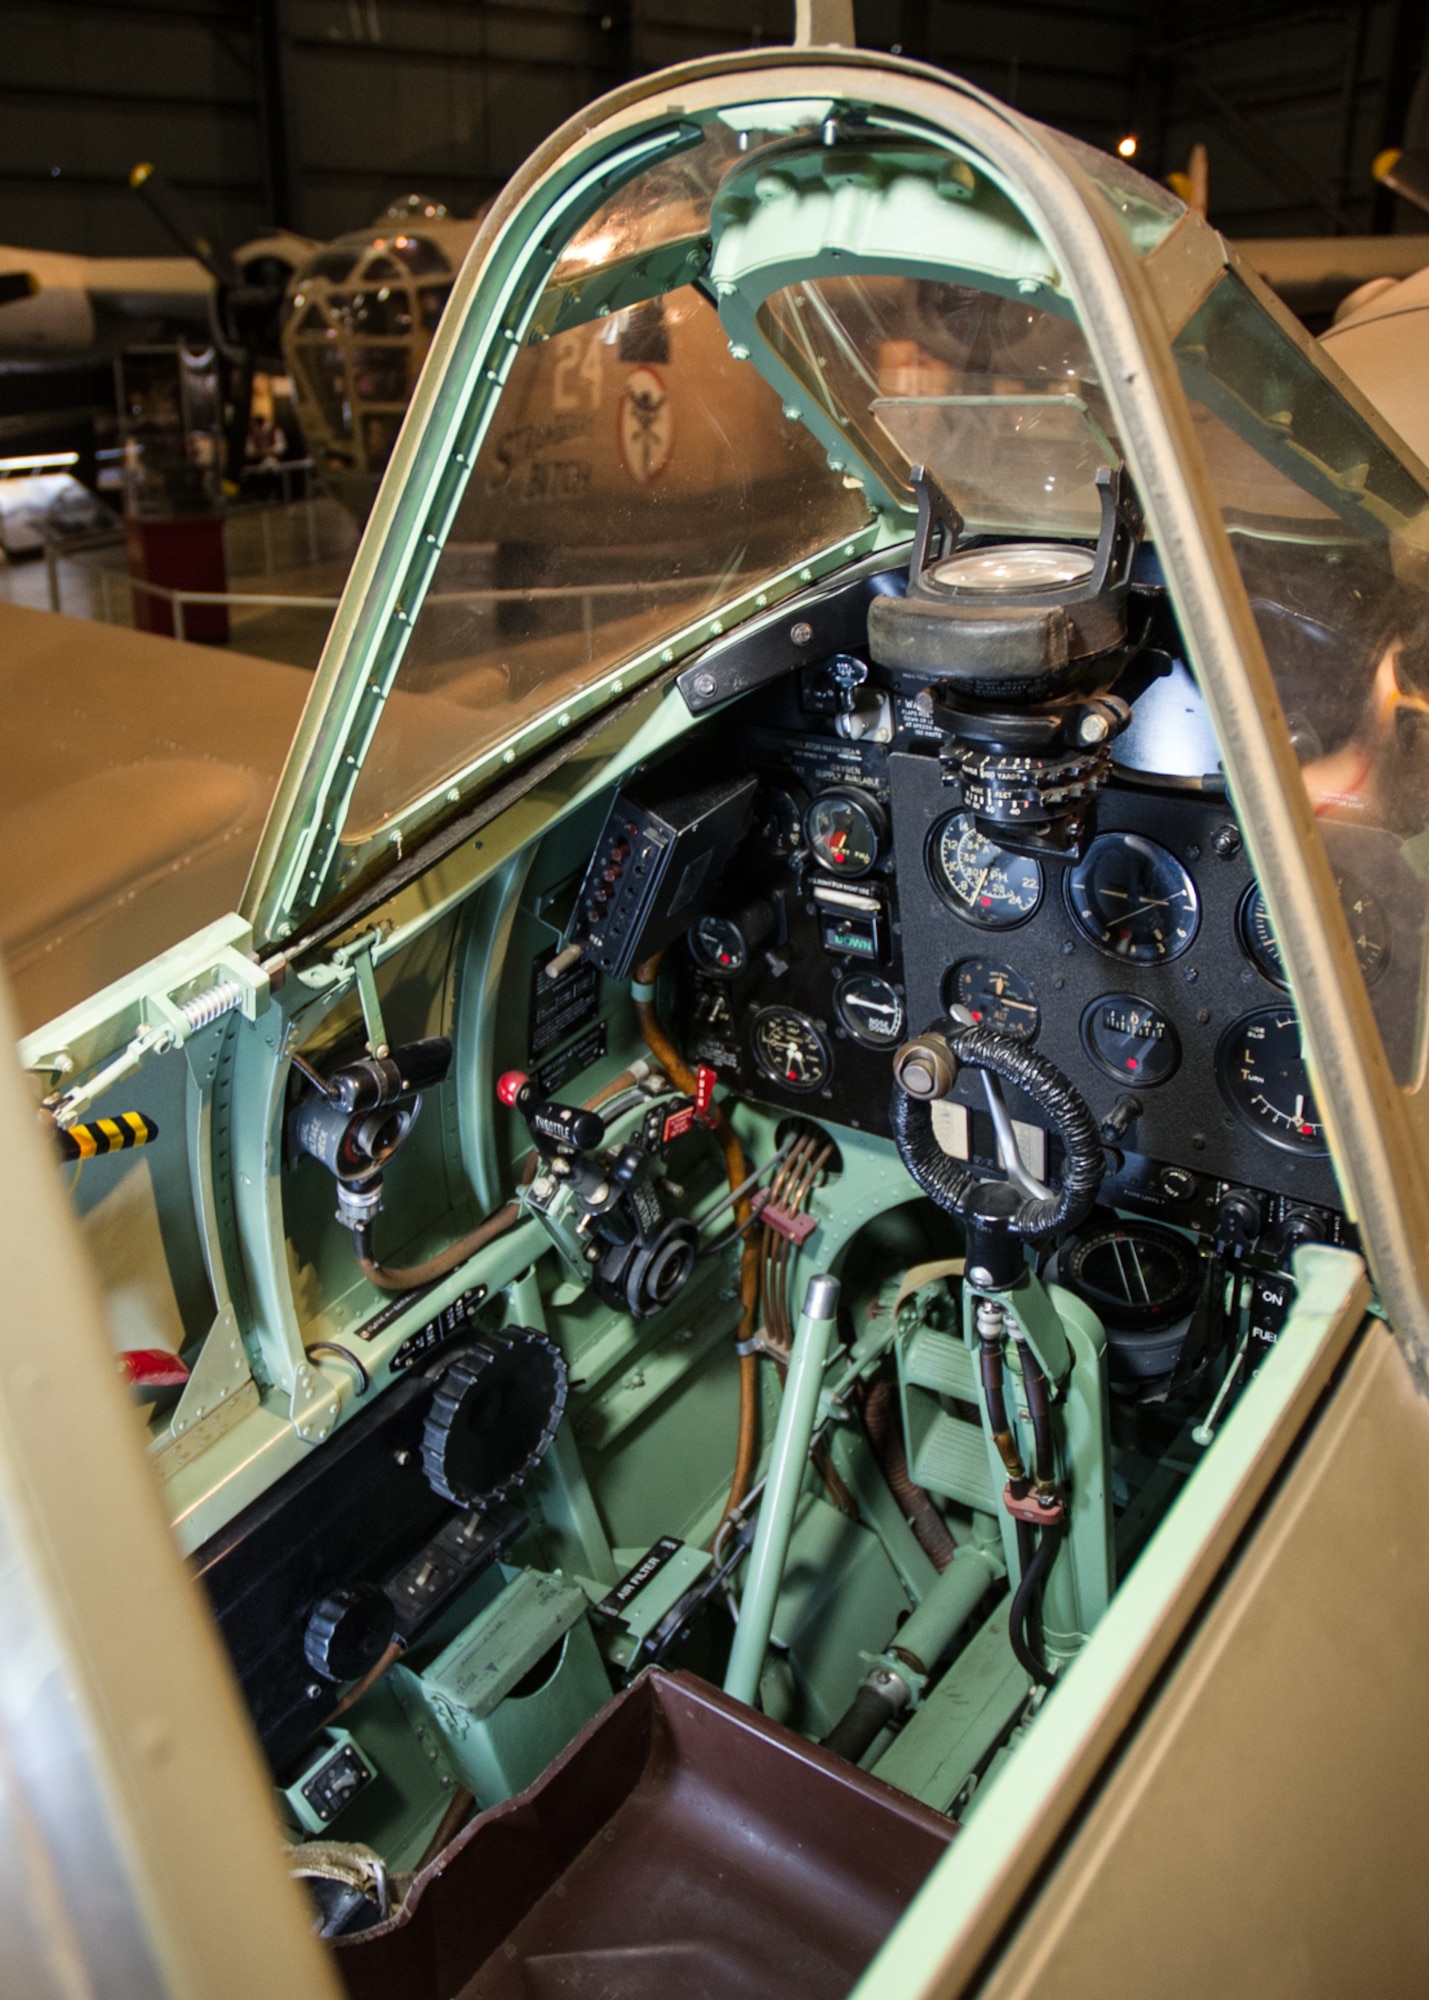 DAYTON, Ohio -- Supermarine Spitfire Mk.Vc cockpit in the World War II Gallery at the National Museum of the United States Air Force. (U.S. Air Force photo)